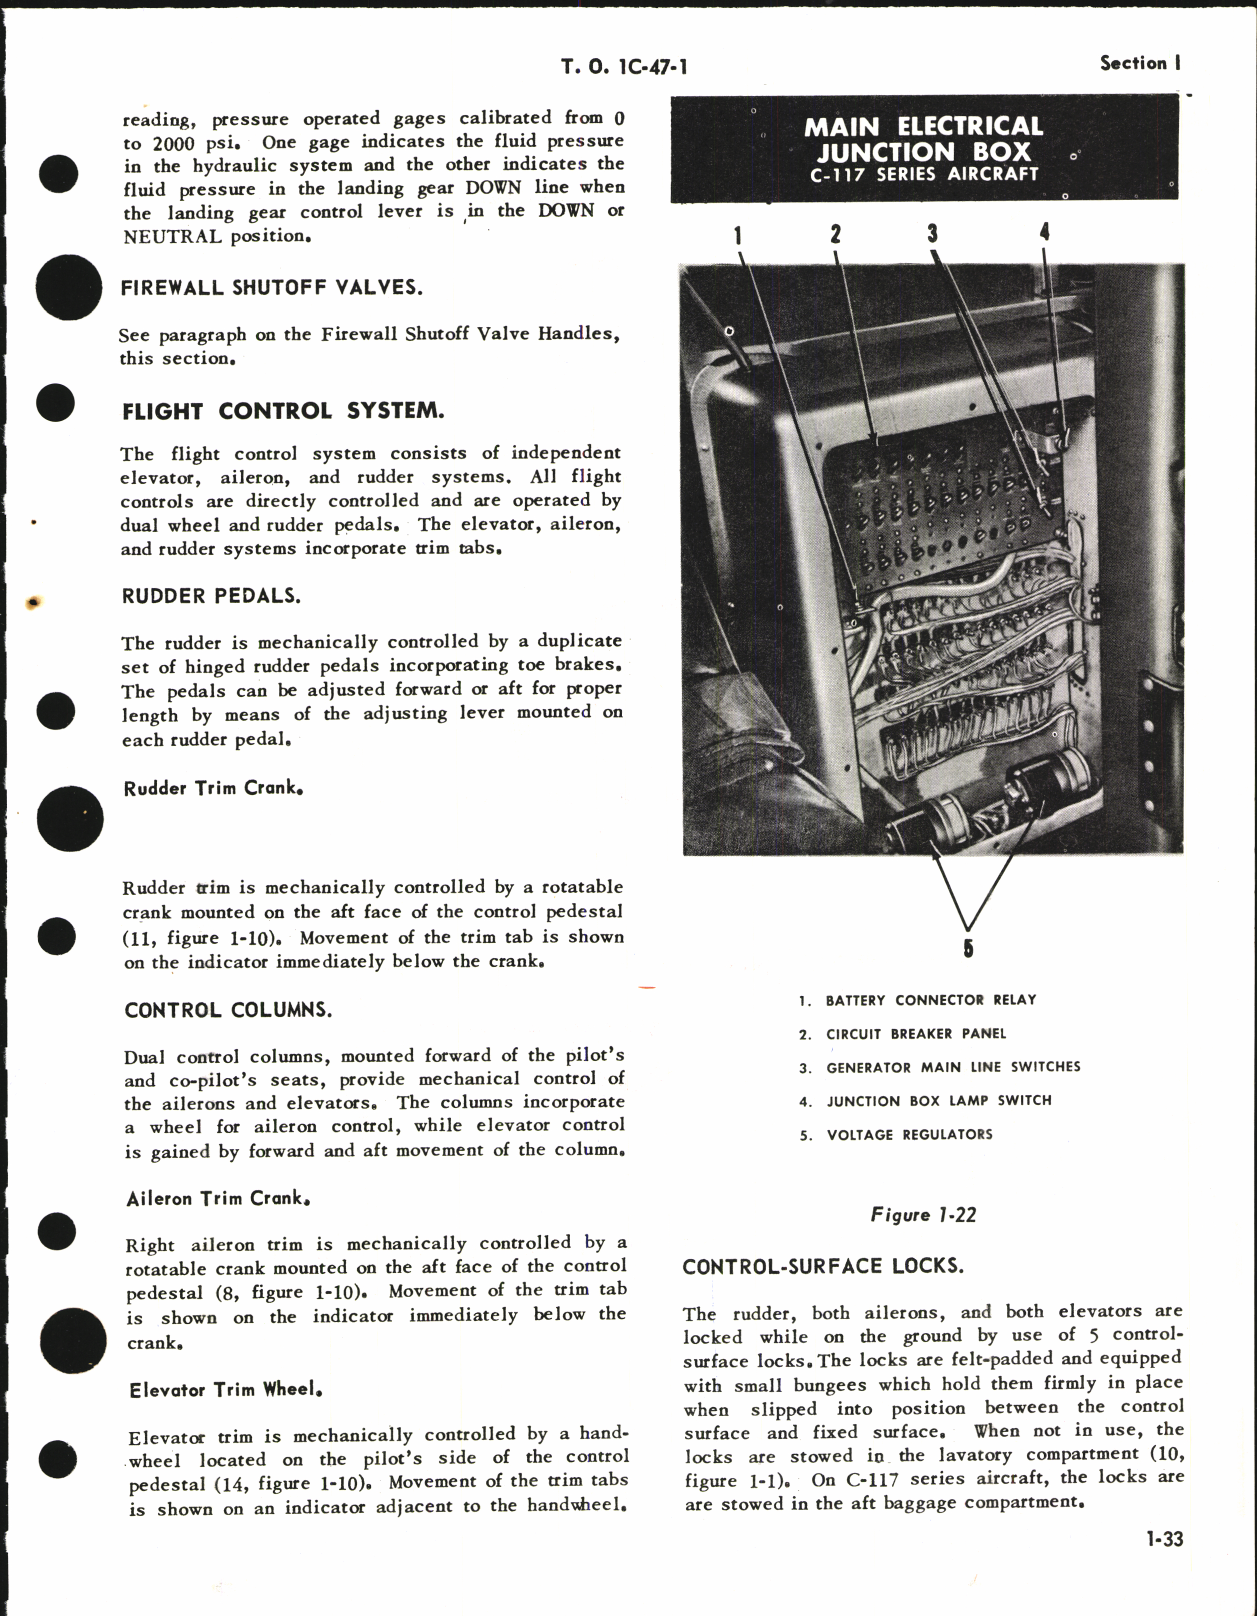 Sample page 7 from AirCorps Library document: Flight Manual for C-47, A, B, D, H, J, HC-47, C-117A, B, C, R4D-1, and TC-47K